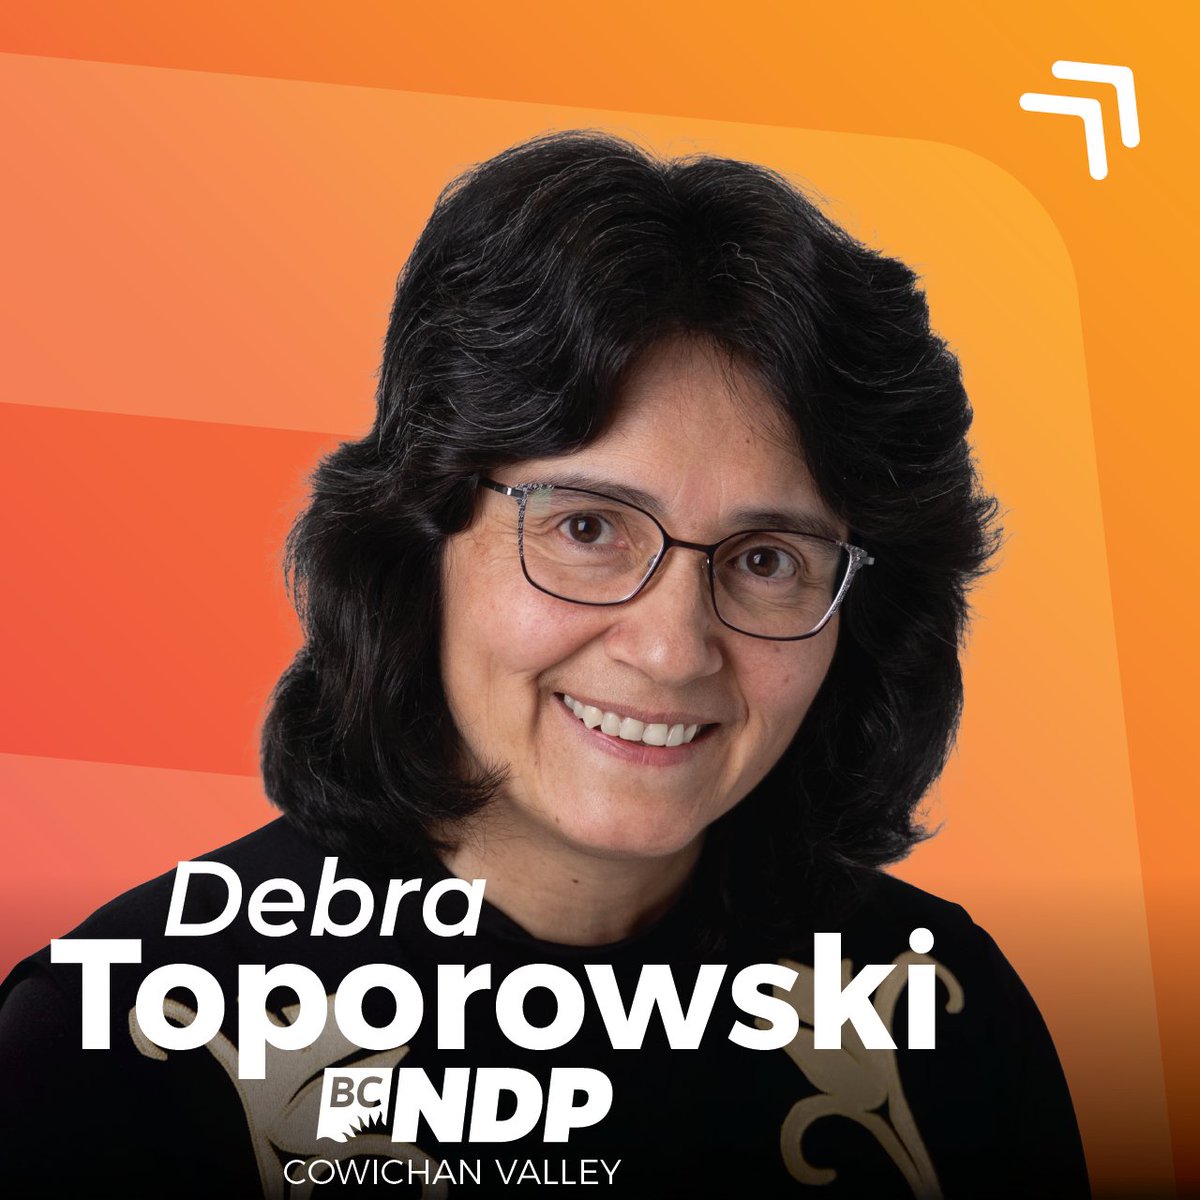 We're thrilled to welcome Debra Toporowski (Qwulti’stunaat) as our BC NDP candidate in Cowichan Valley. A member of the Cowichan nation, Debra is a two term elected councillor in the municipality of North Cowichan and a five time councillor of Cowichan Tribes. Welcome, Debra!